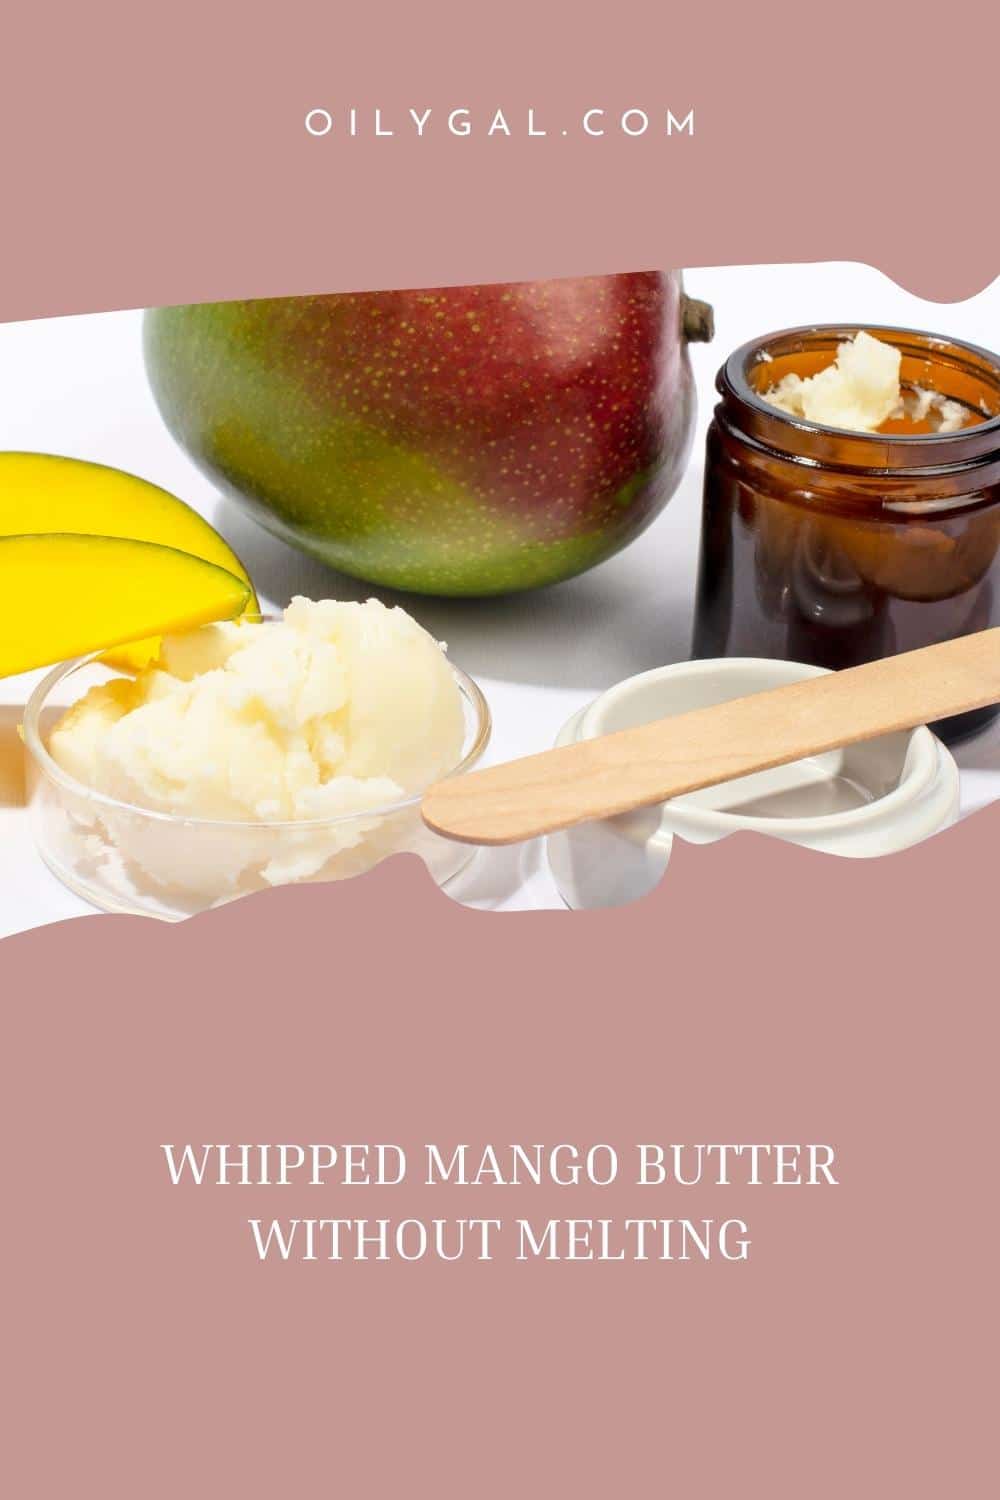 Whipped Mango Butter Without Melting